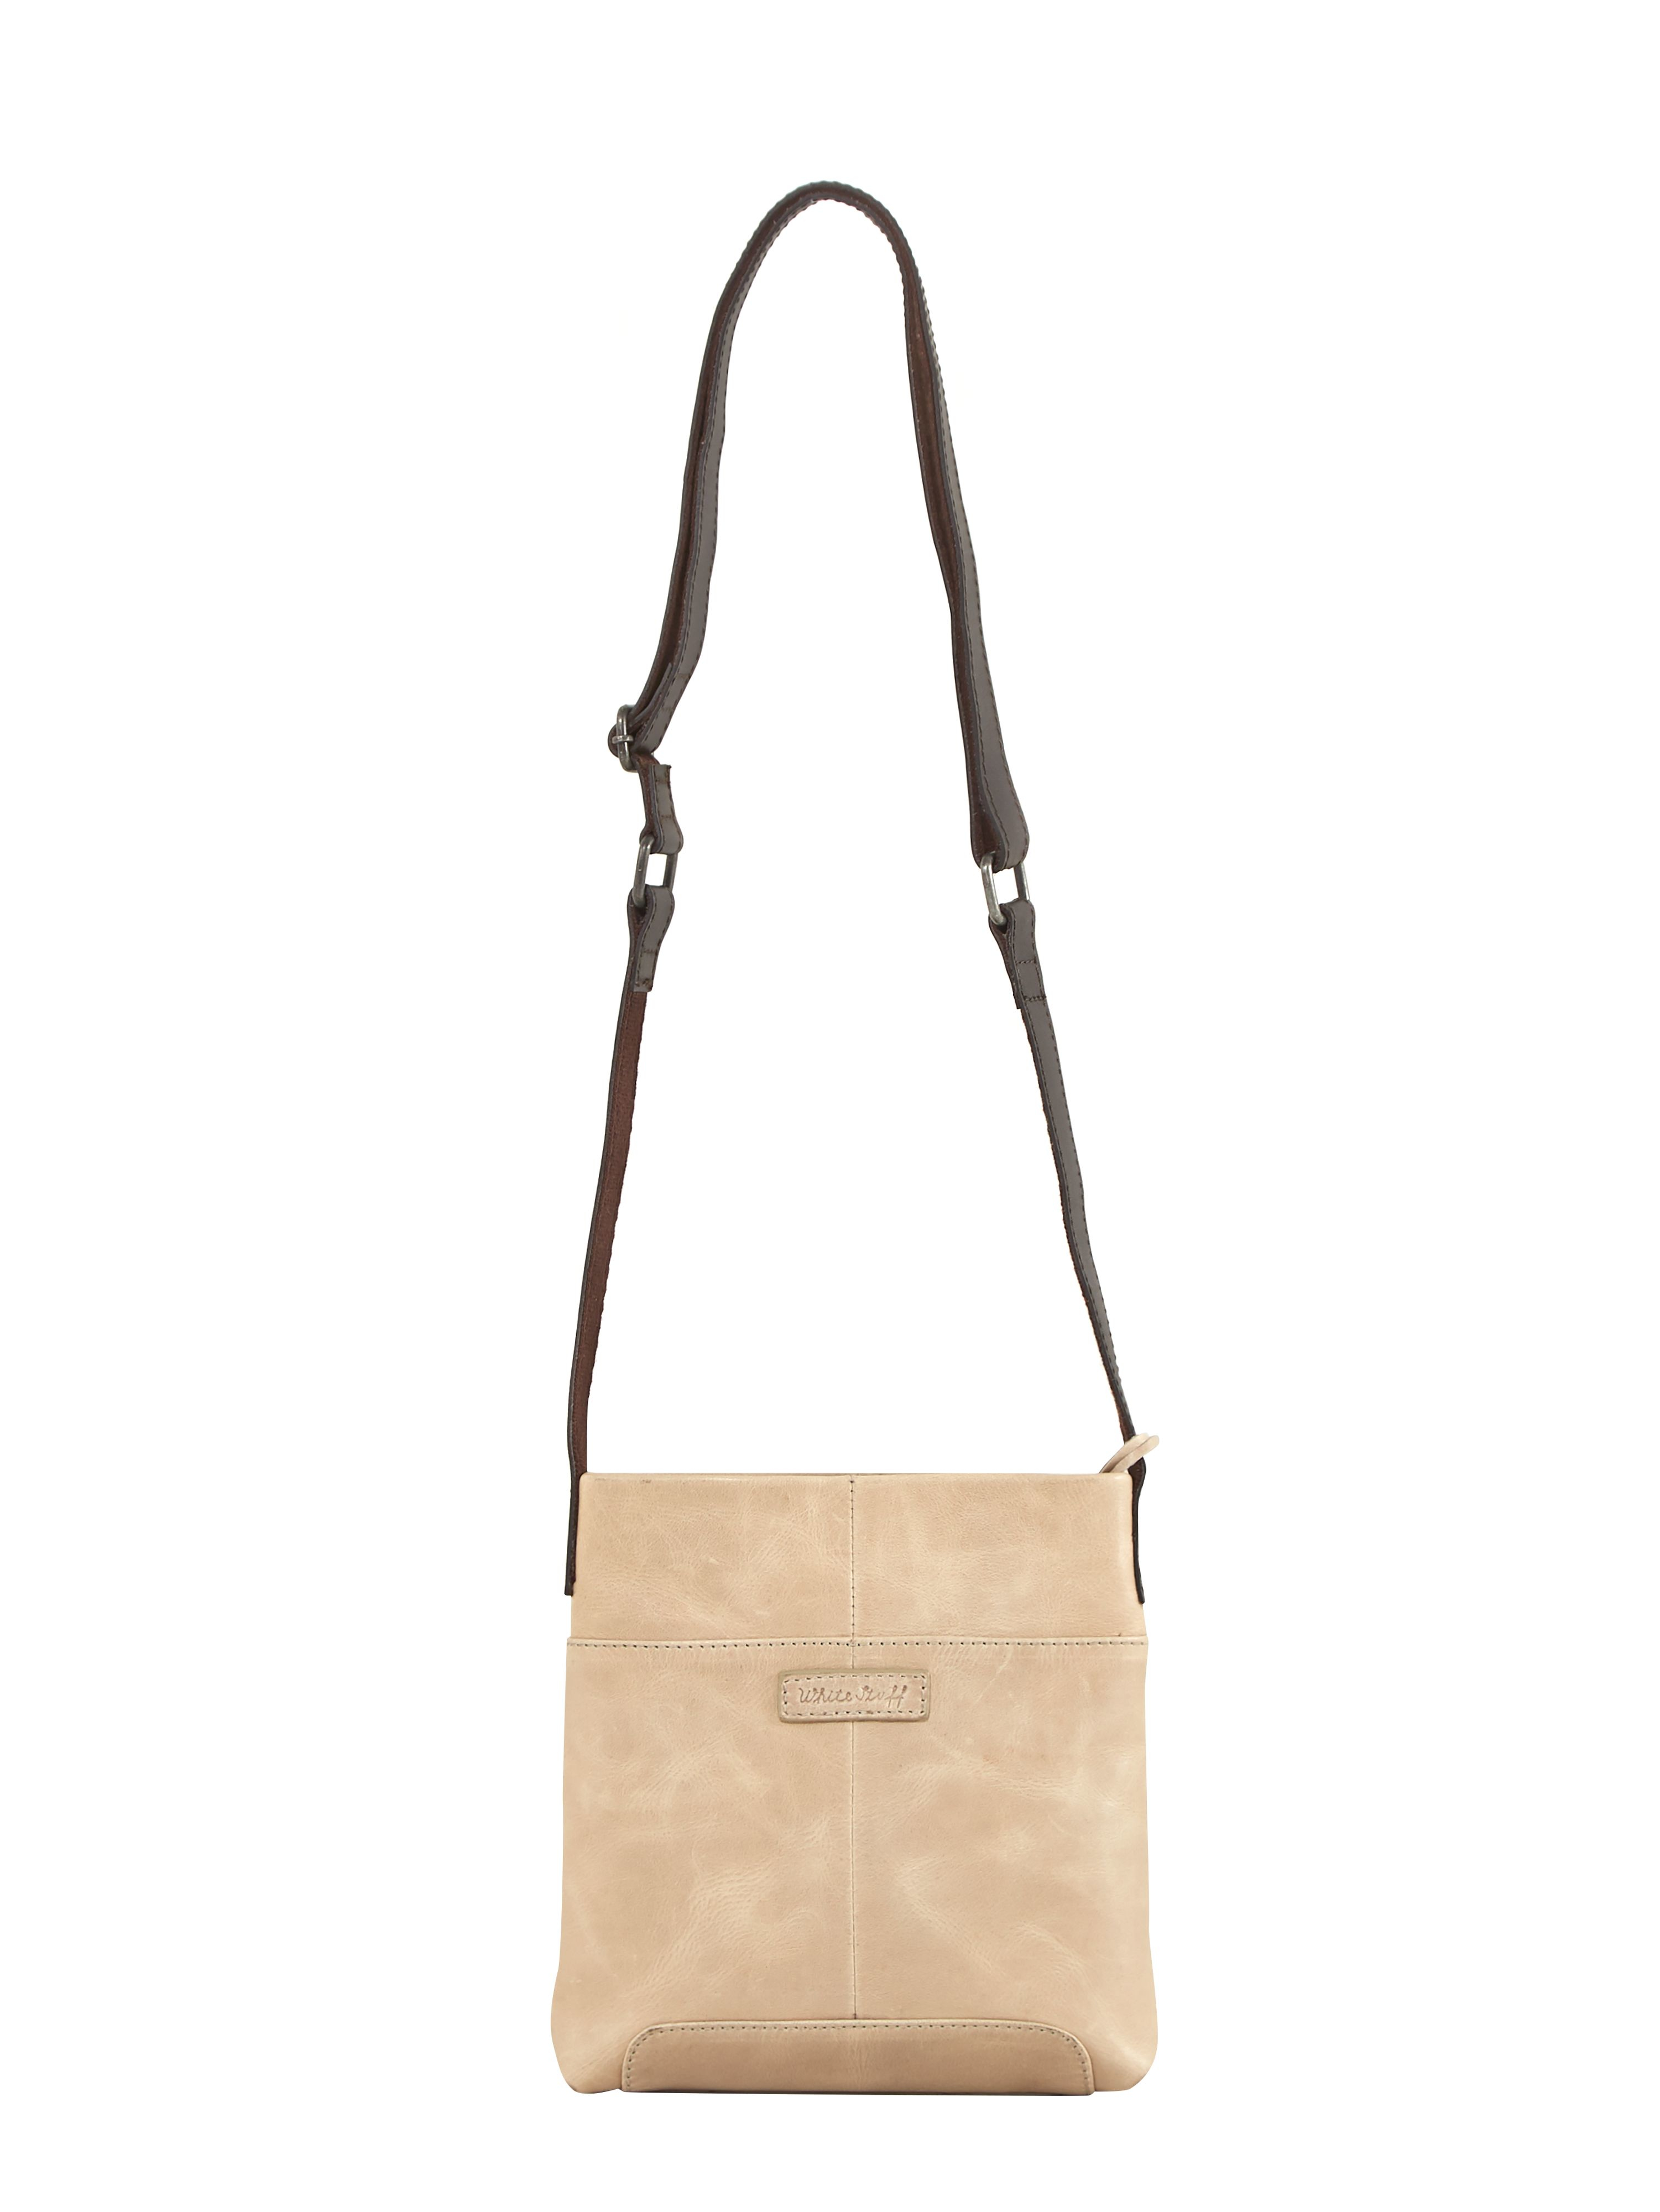 White Stuff Leather Small Issy Cross Body Bag in Natural - Lyst